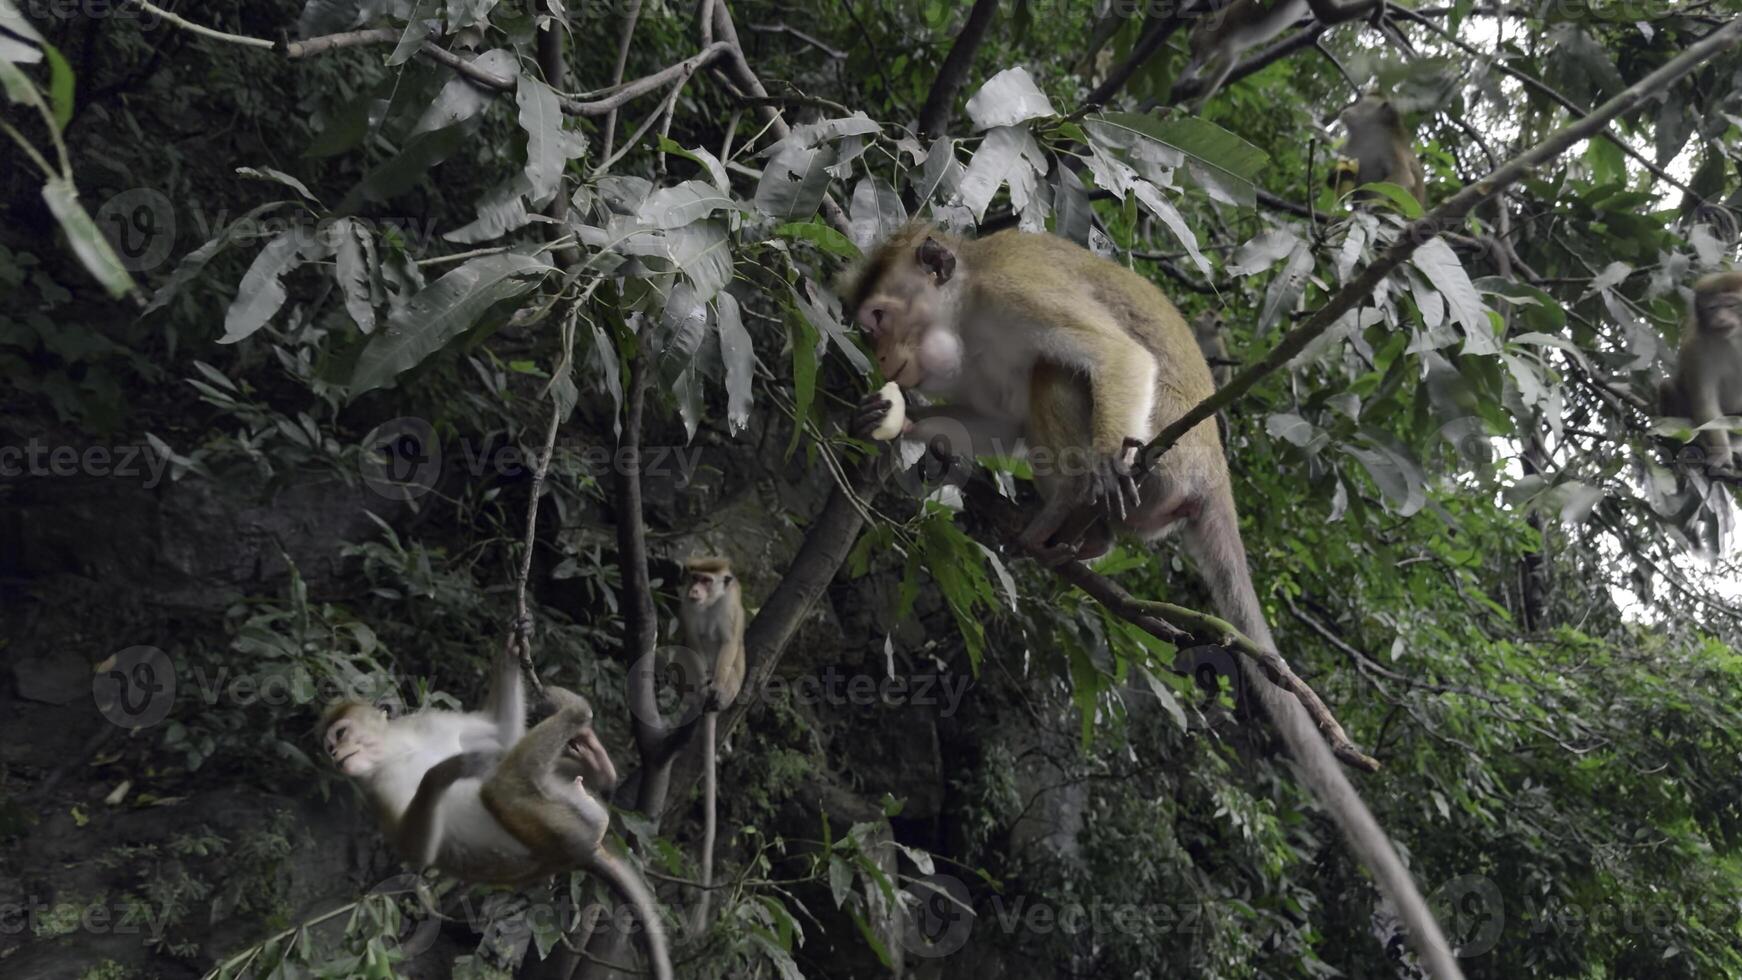 Monkeys on tree branches with food. Action. Monkeys are treated to treats from tourists in jungle. Monkeys in trees by hiking trails photo